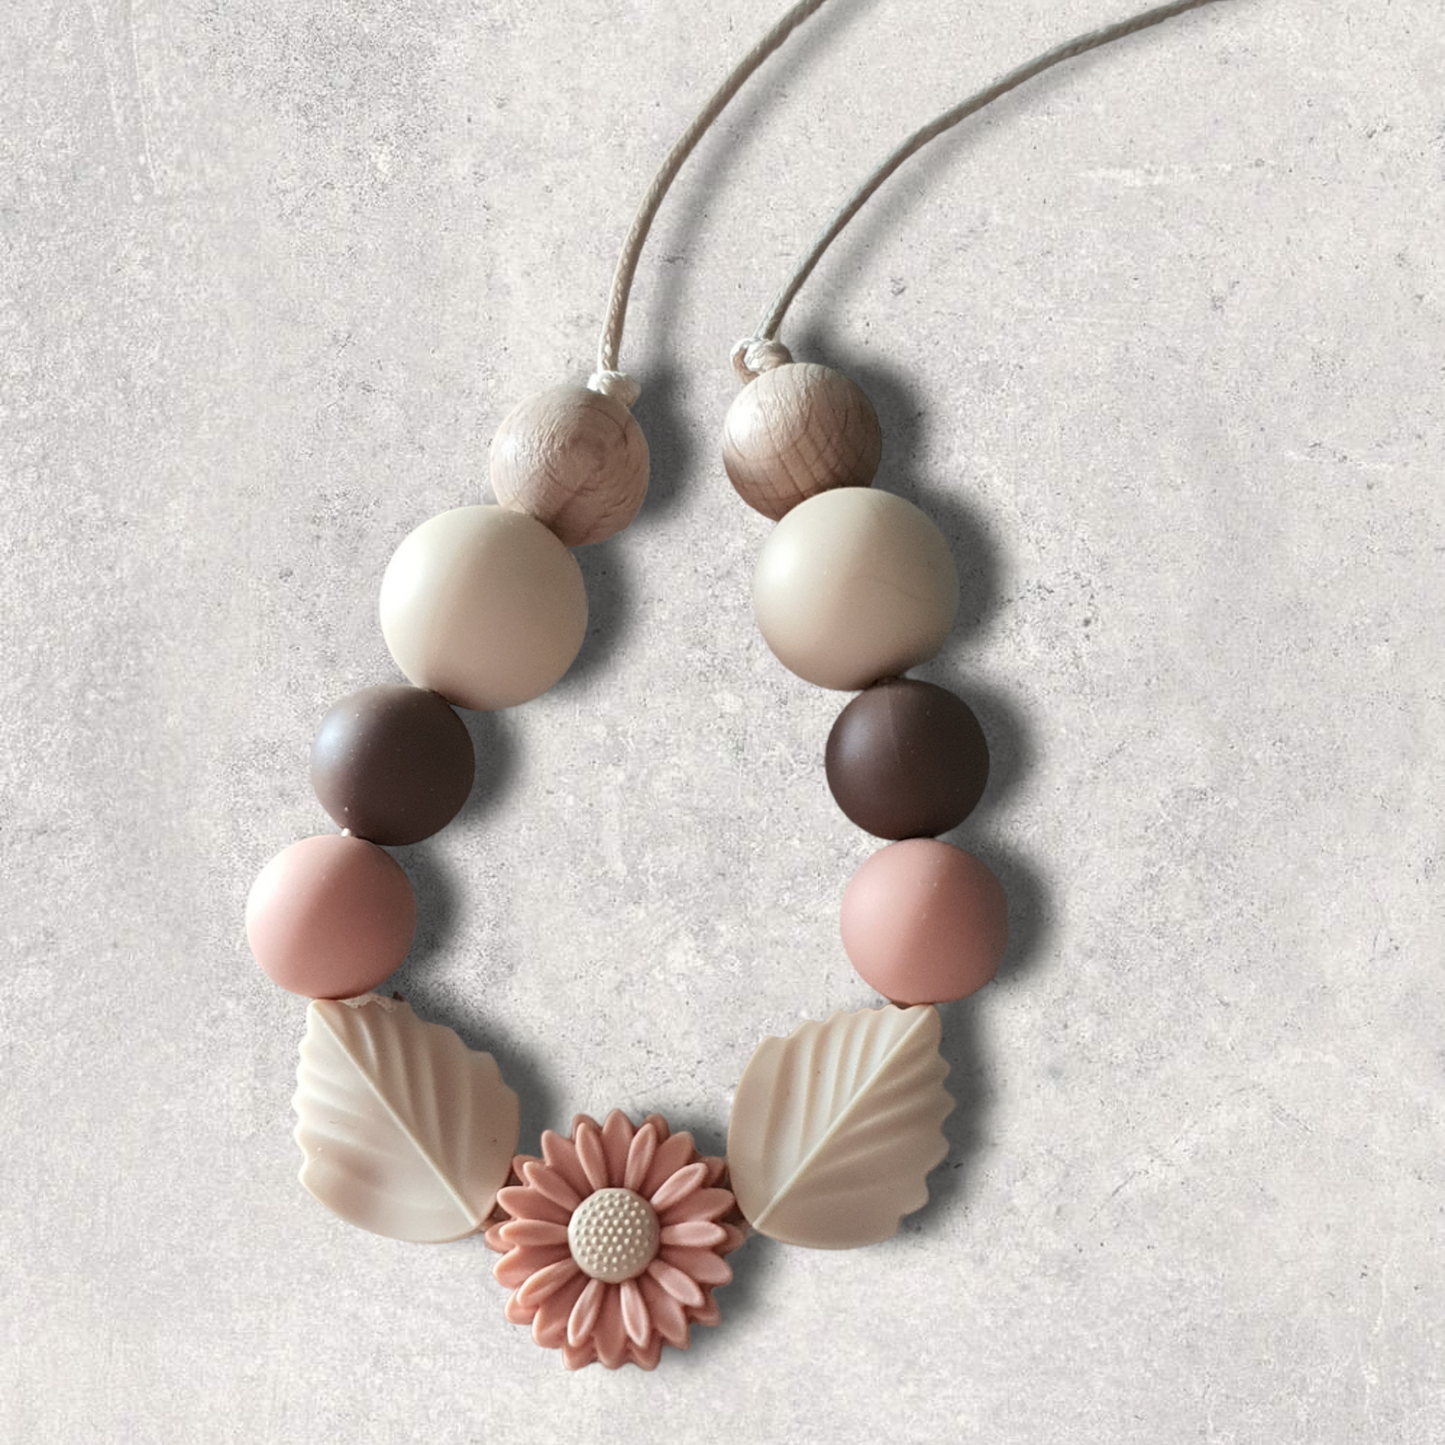 Daisy and Leaf Silicone Bead Necklace in Cream, Peach and Cocoa Brown | Handmade Necklace - PeppaTree Design Store